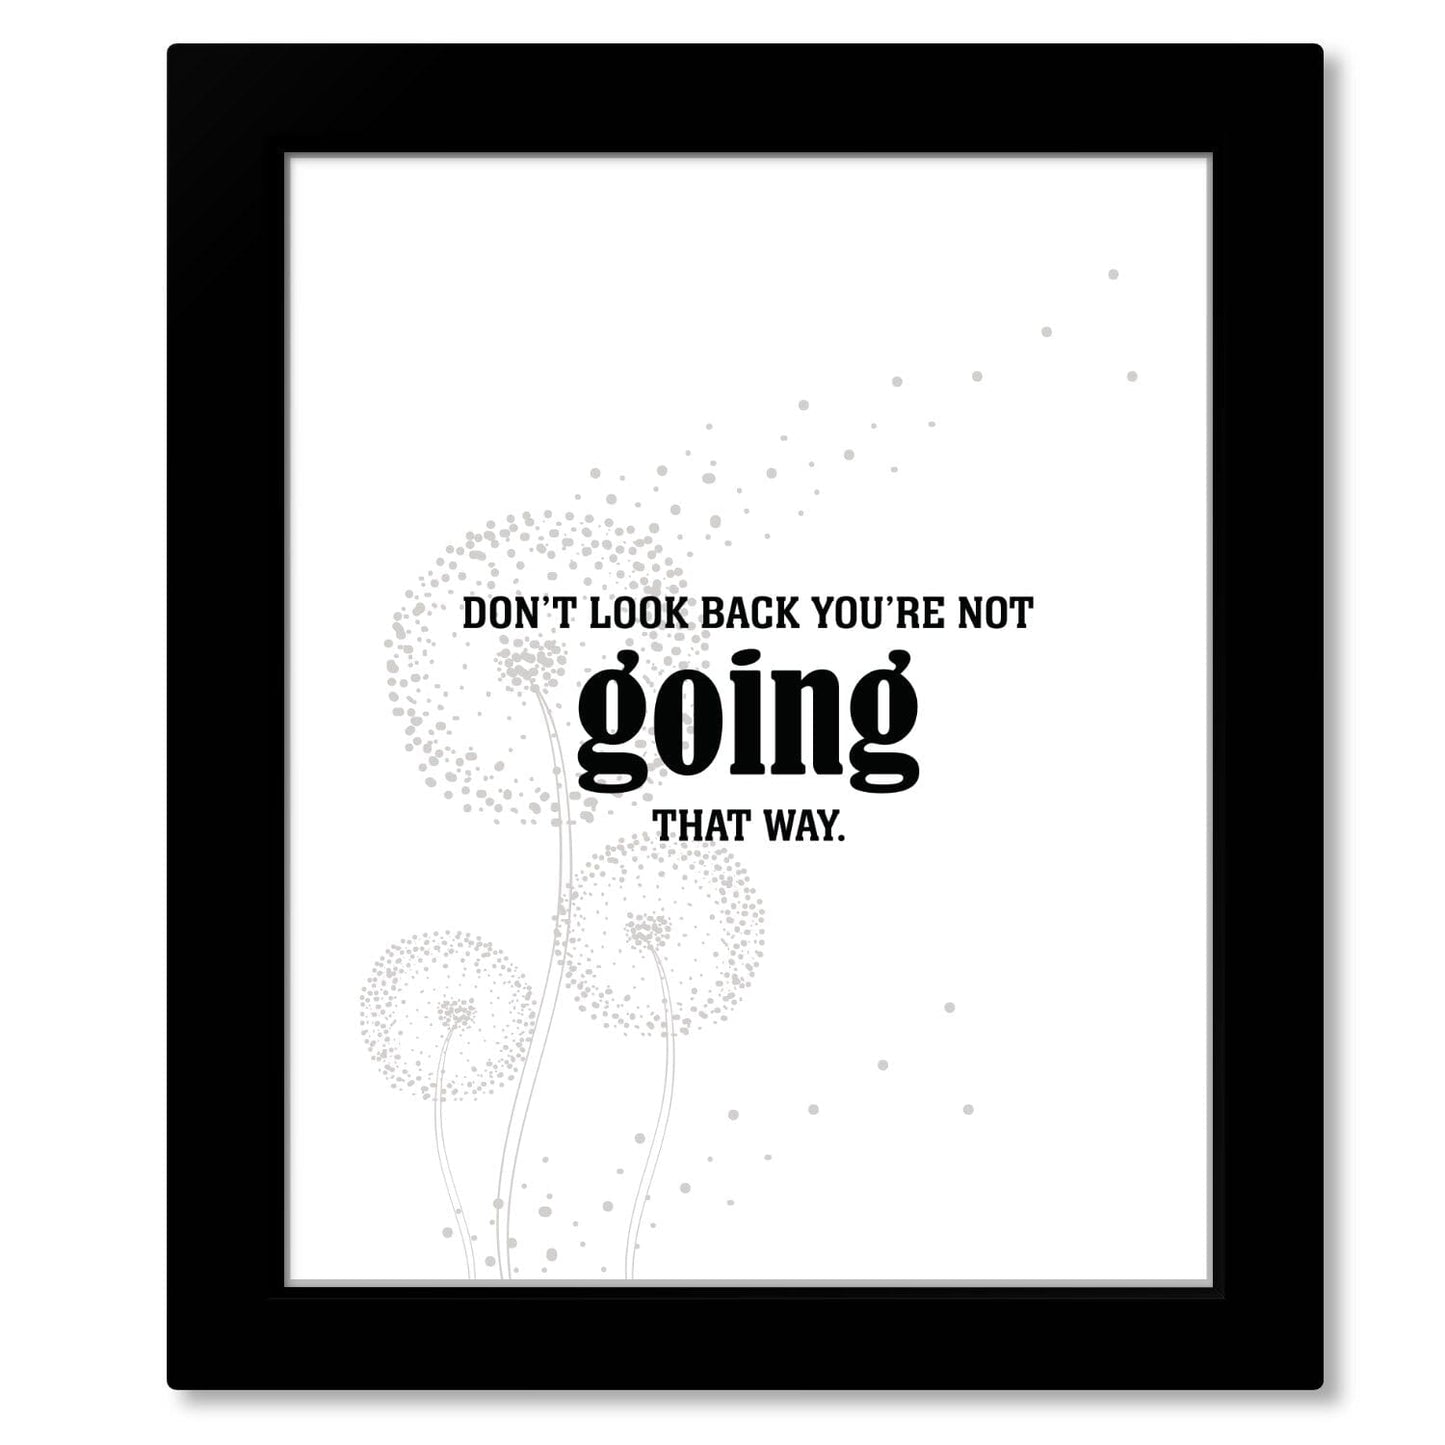 Don't Look Back You're Not Going that Way - Wise Witty Art Wise and Wiseass Quotes Song Lyrics Art 8x10 Framed Print 